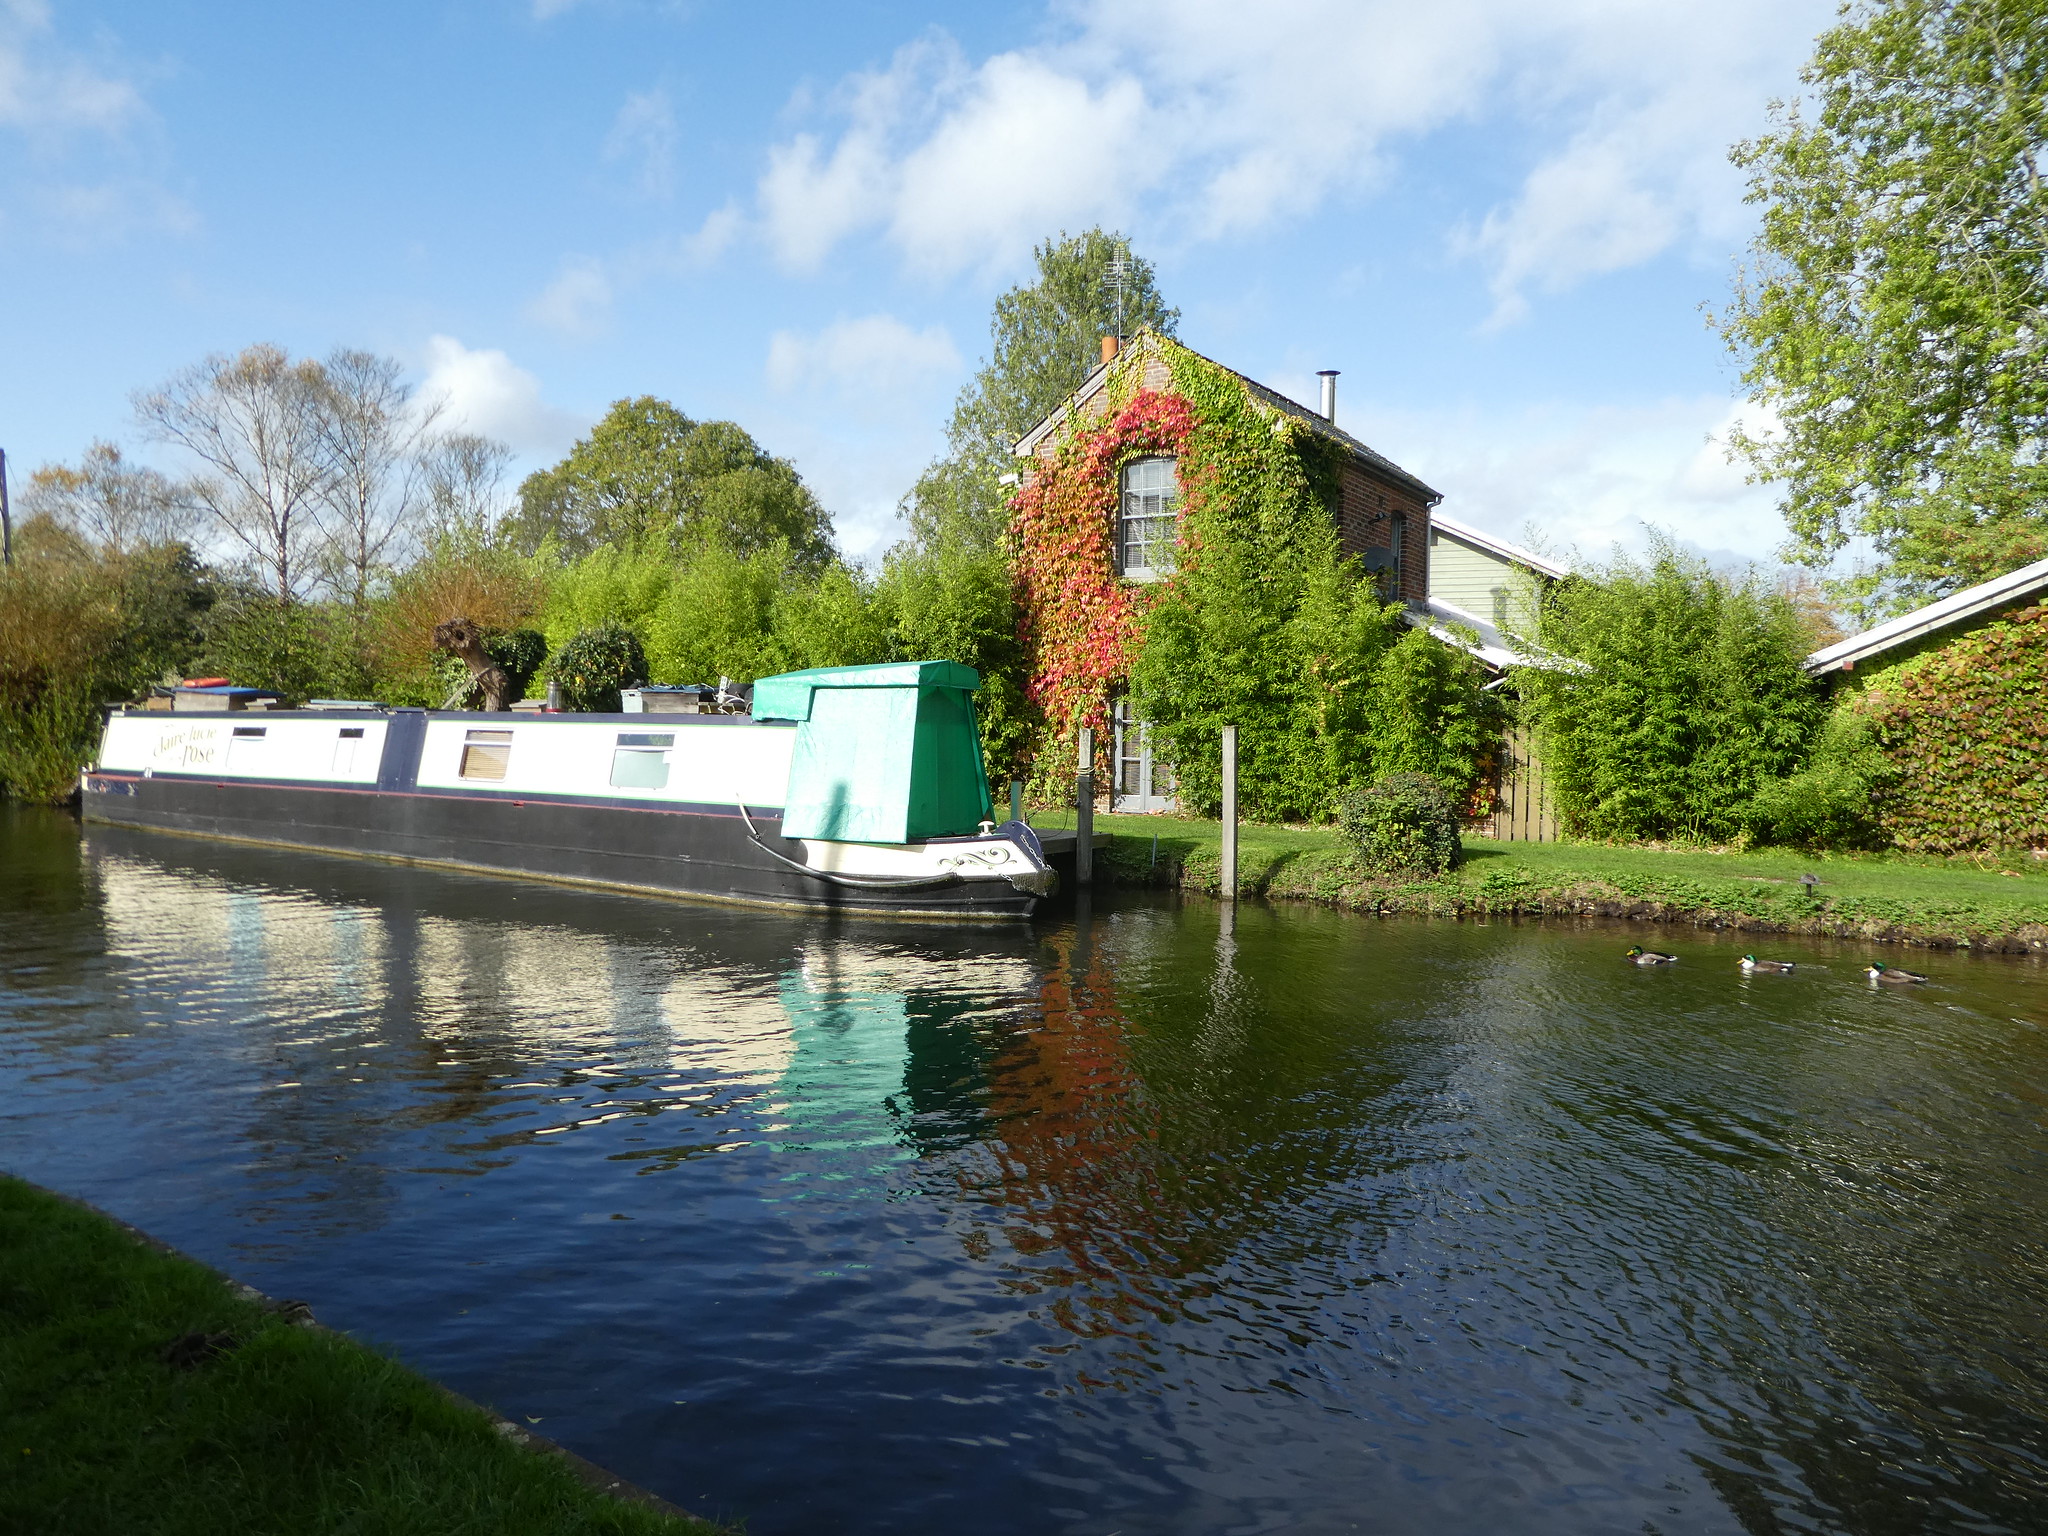 The Kennet and Avon Canal in Newbury, Berkshire